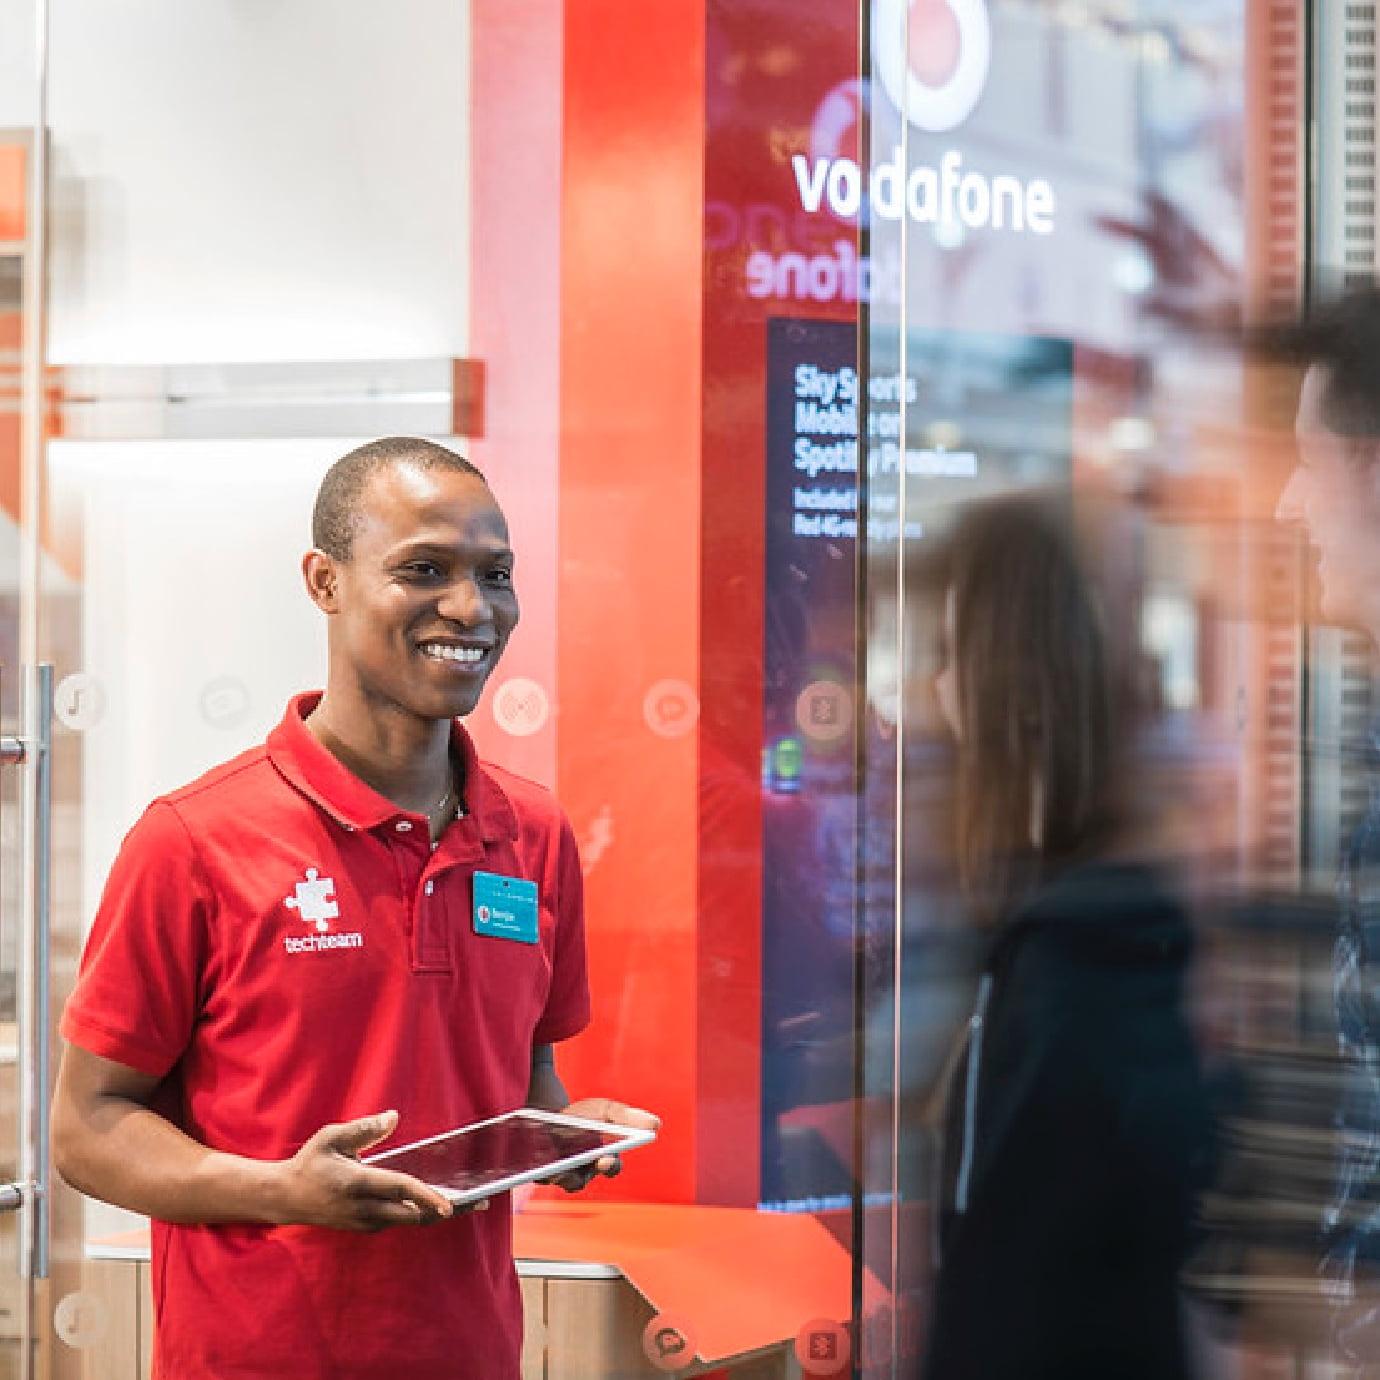 vodafone Employee smiling with tablet